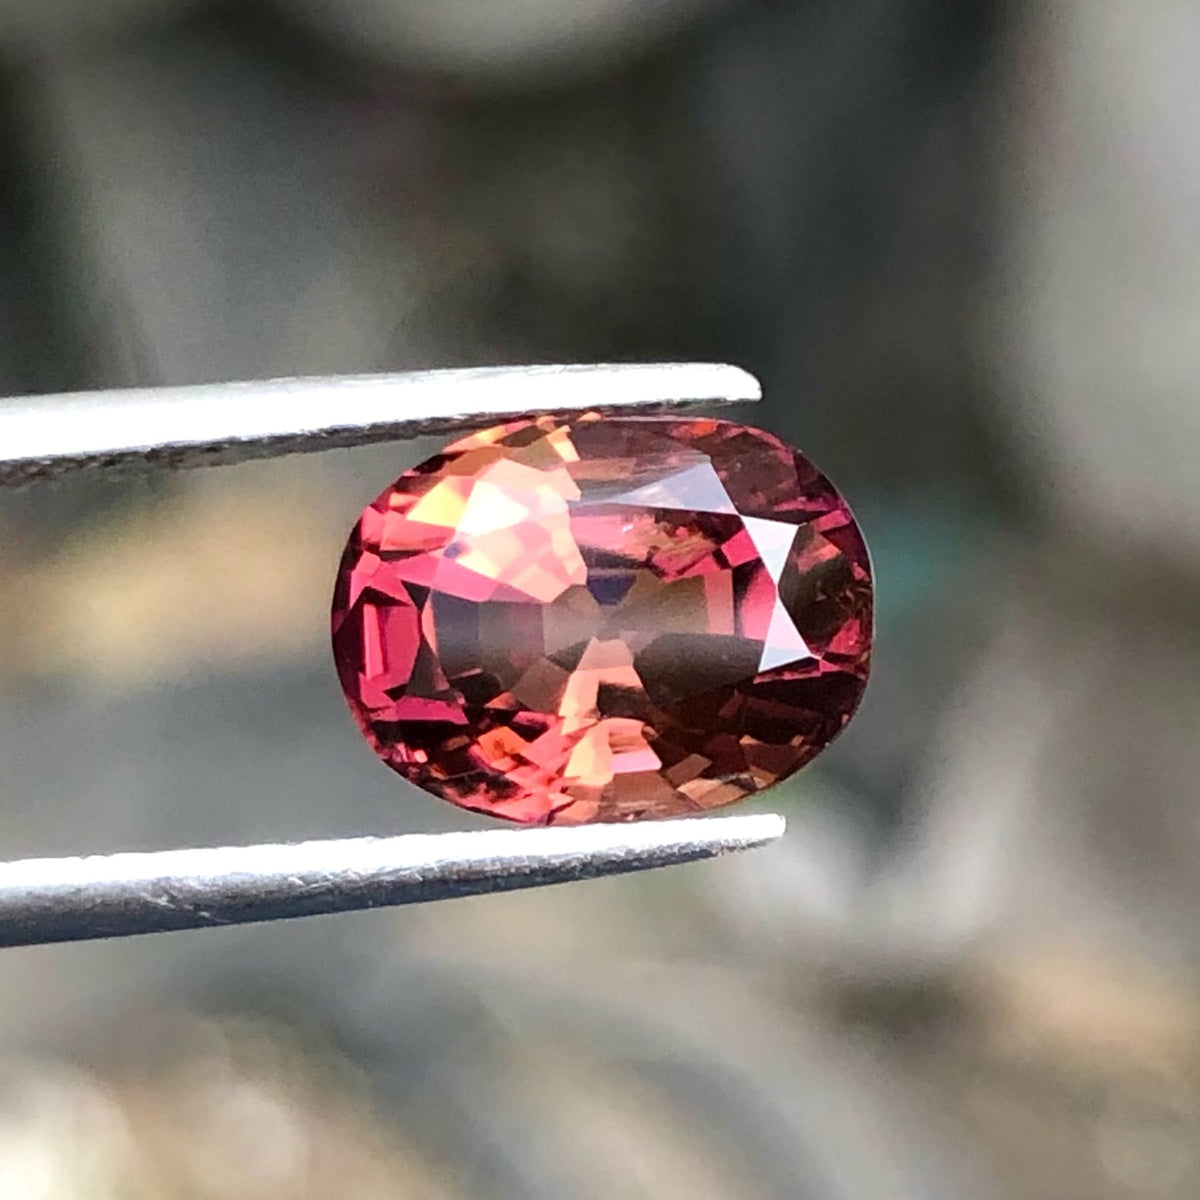 Faceted Pinkish Red Tourmaline